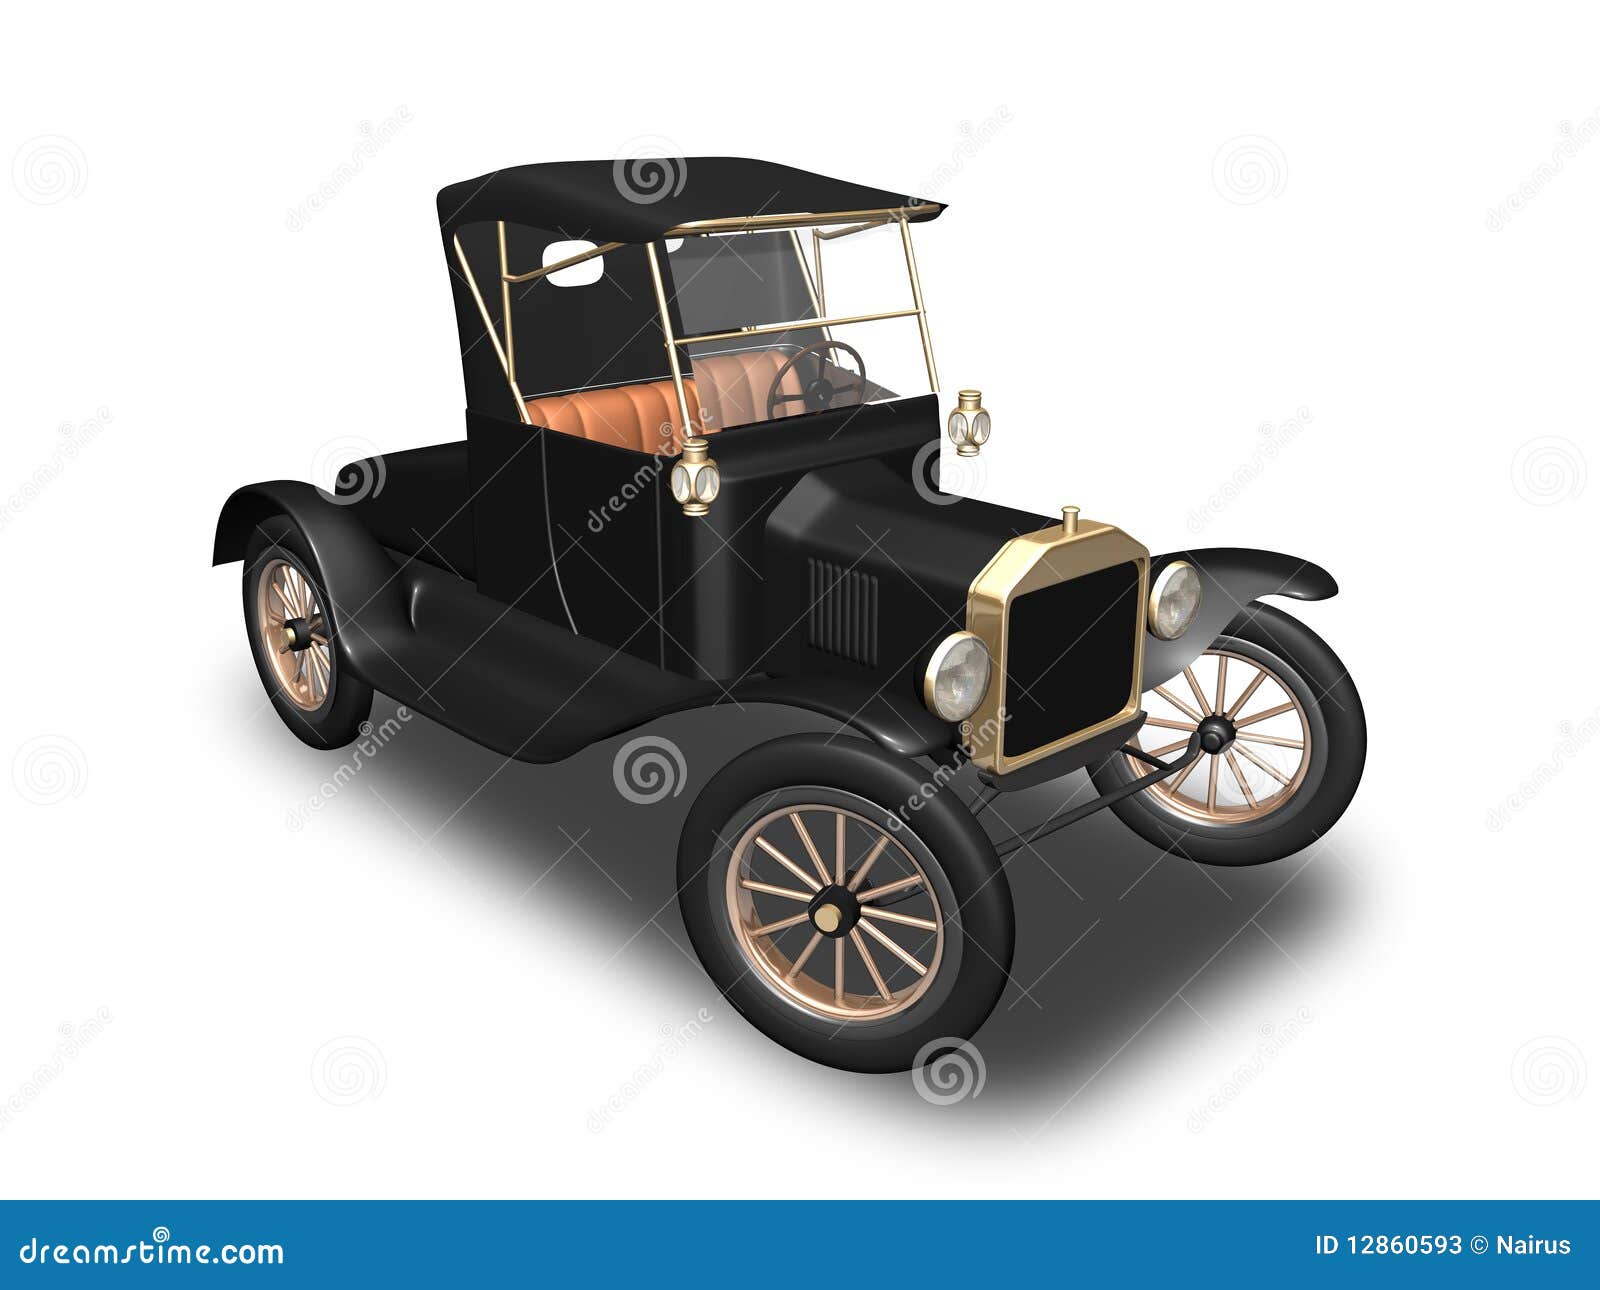 ford model t 1